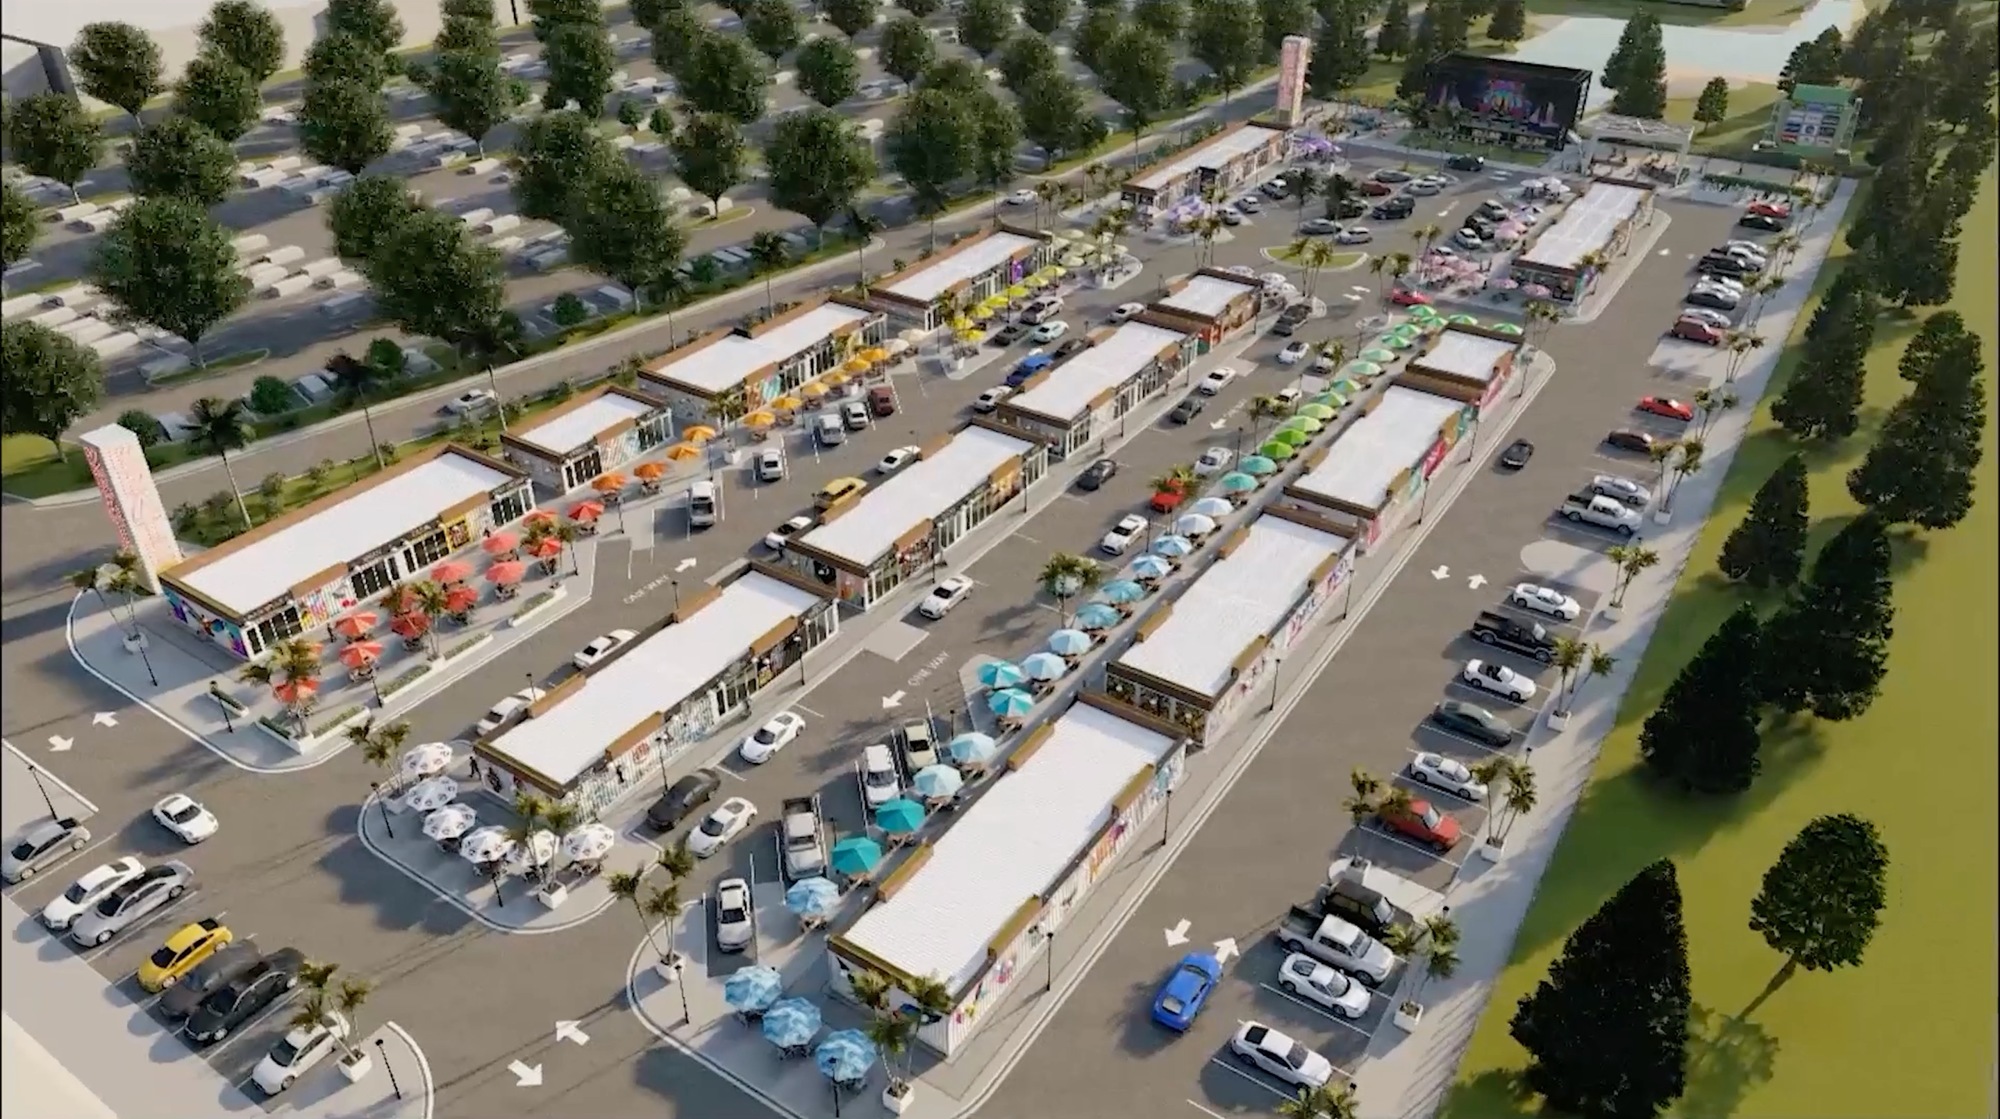 Courtesy. A rendering of what the KRATE container park project will look like when it's fully built out.